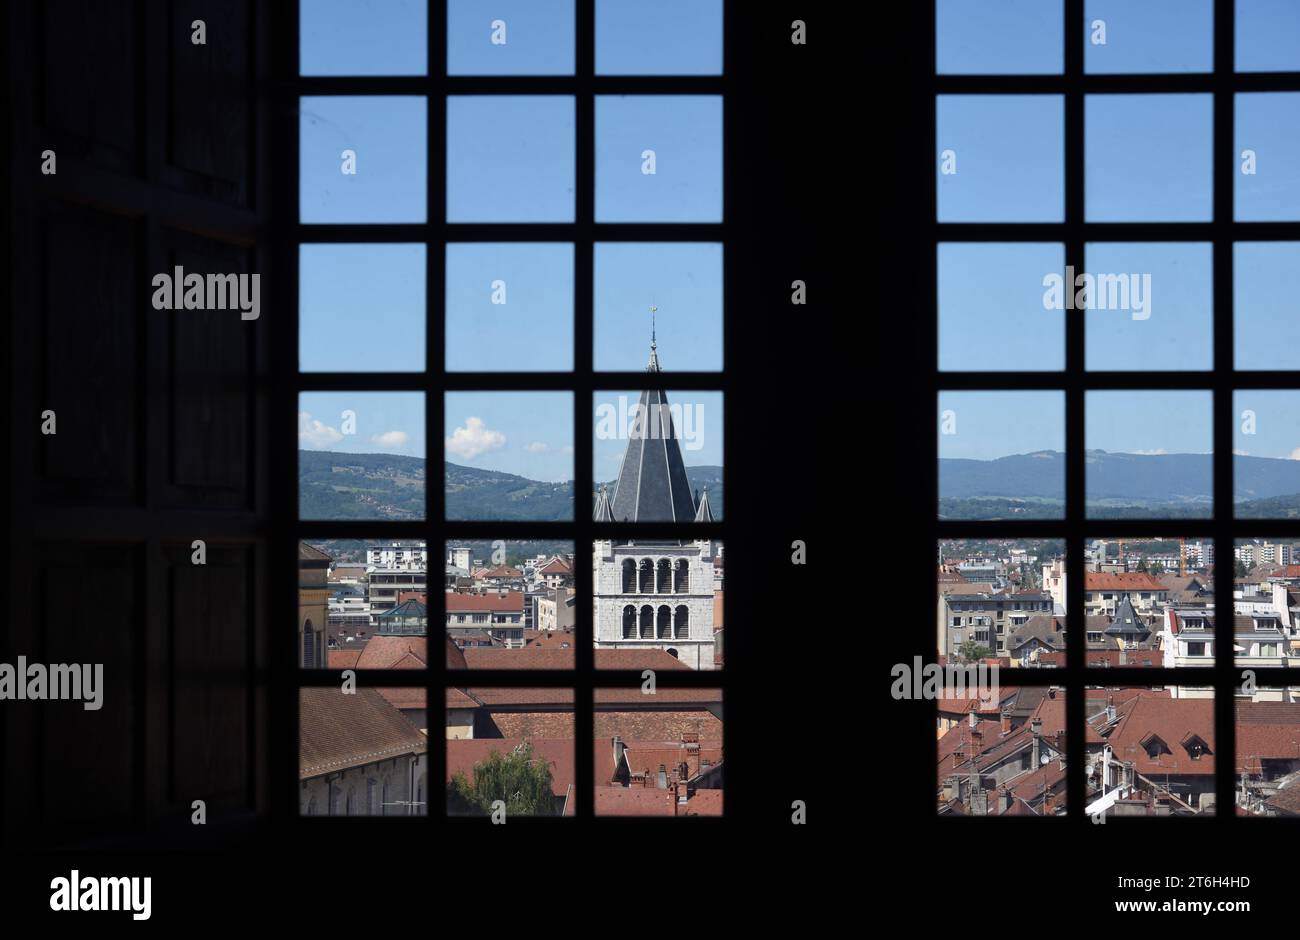 Distorted of Deformed View of the Skyline and Rooftops of the Old Town or Historic District of Annacy Haute Savoie France, through Old Paned Window of Annecy Castle or Chateau. With Church Spire or Belfry of the Church or Eglise of Notre Dame de Lisse Stock Photo